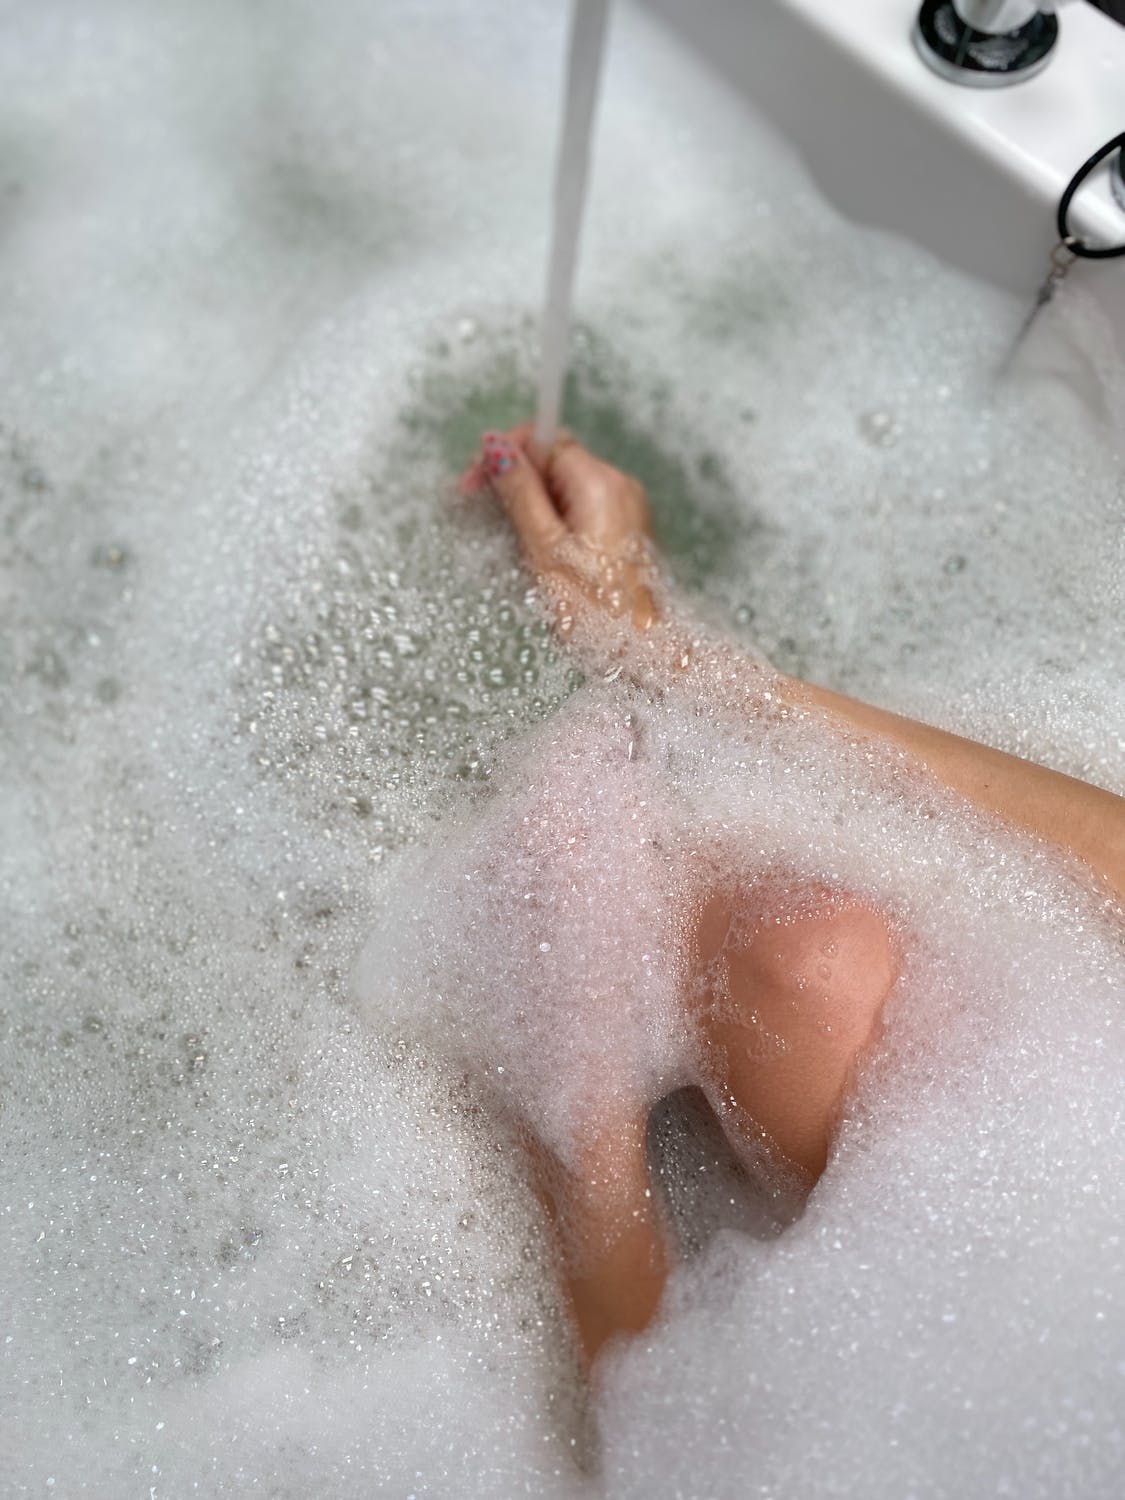 Miss Beatrice was stuck in the bath for three days | Source: Pexels